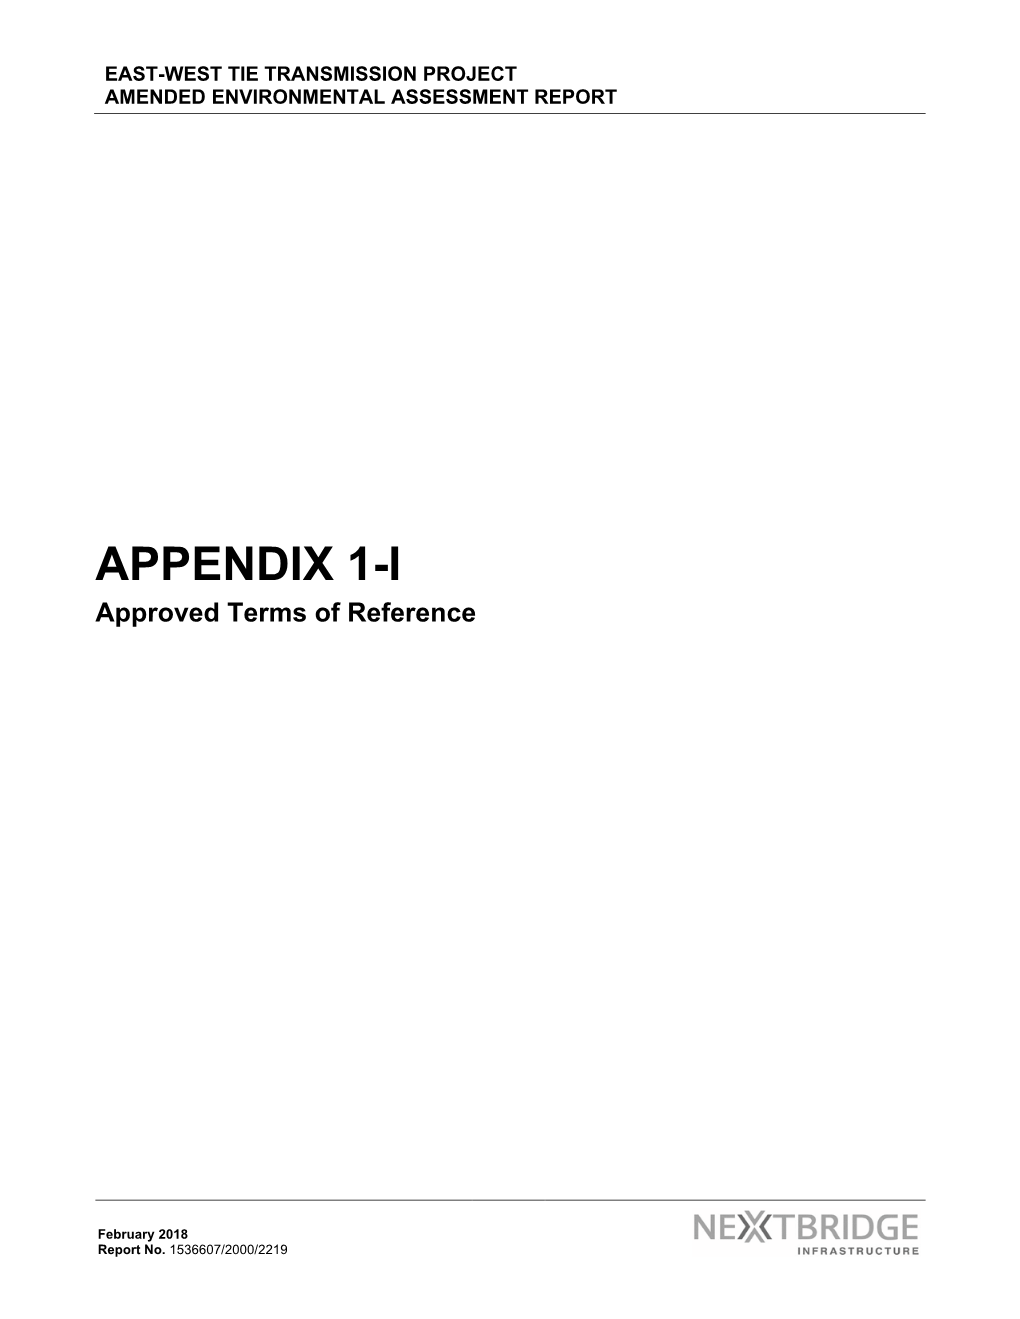 APPENDIX 1-I Approved Terms of Reference